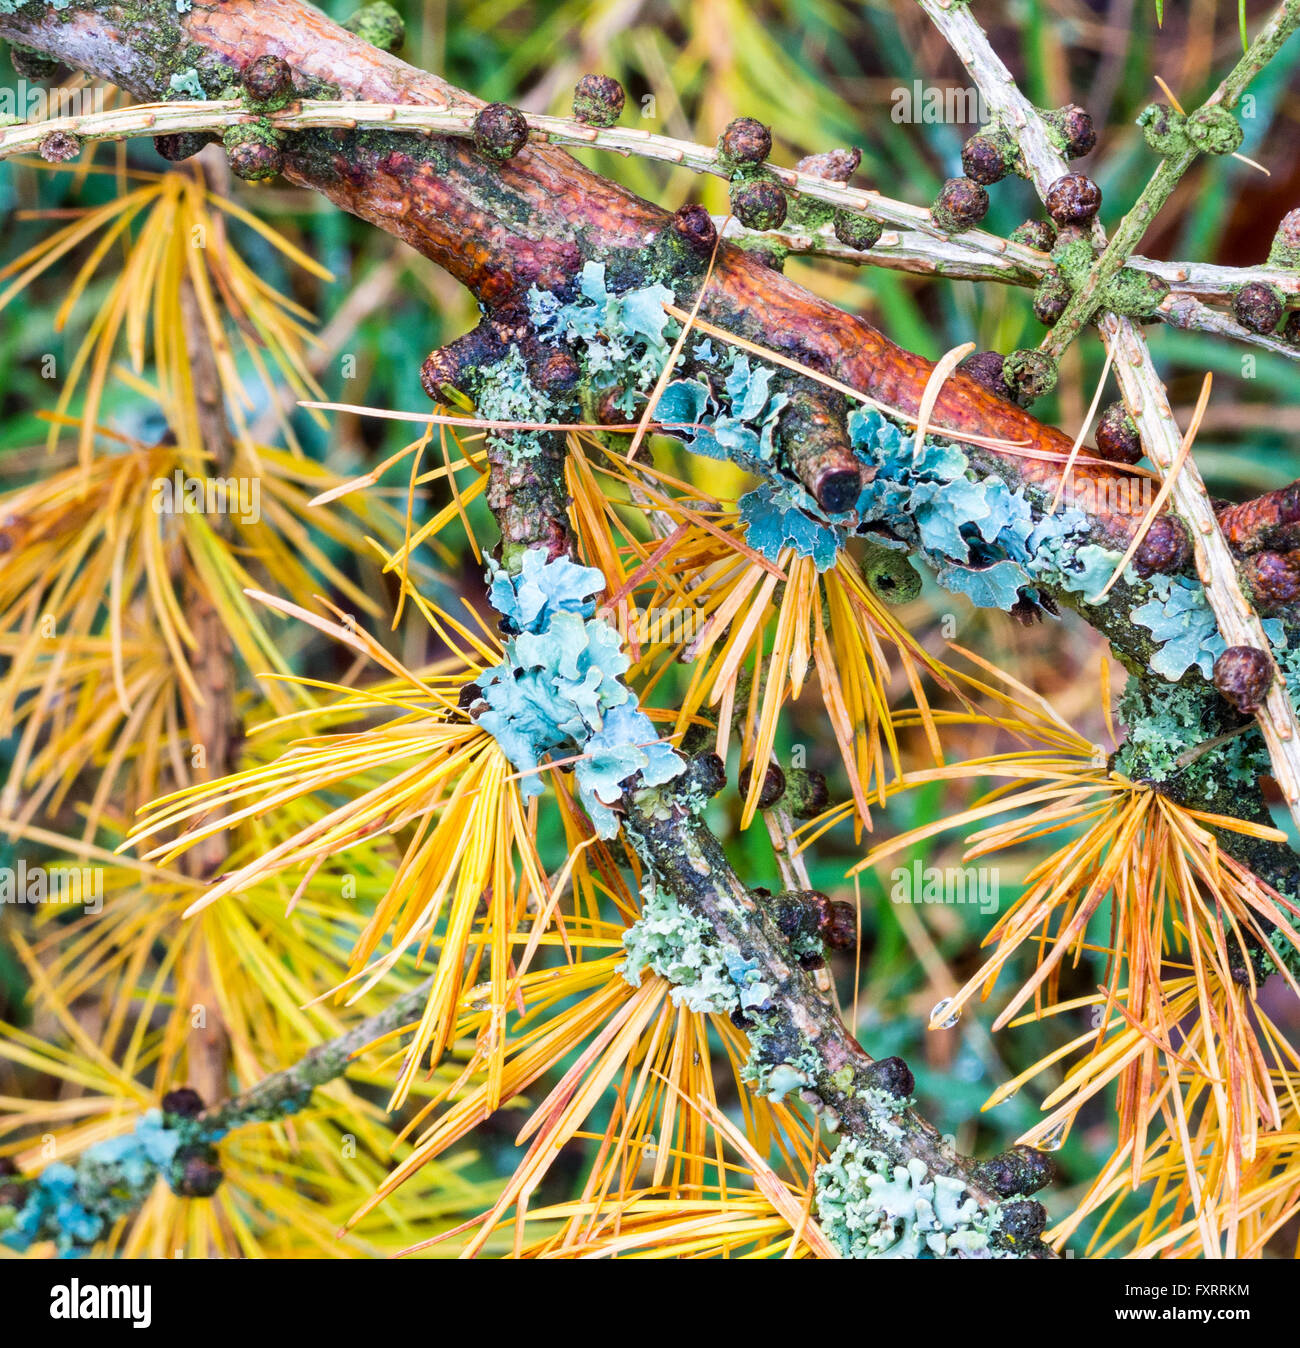 Lichens on the branch of a larch with autumn-colored leaves Stock Photo